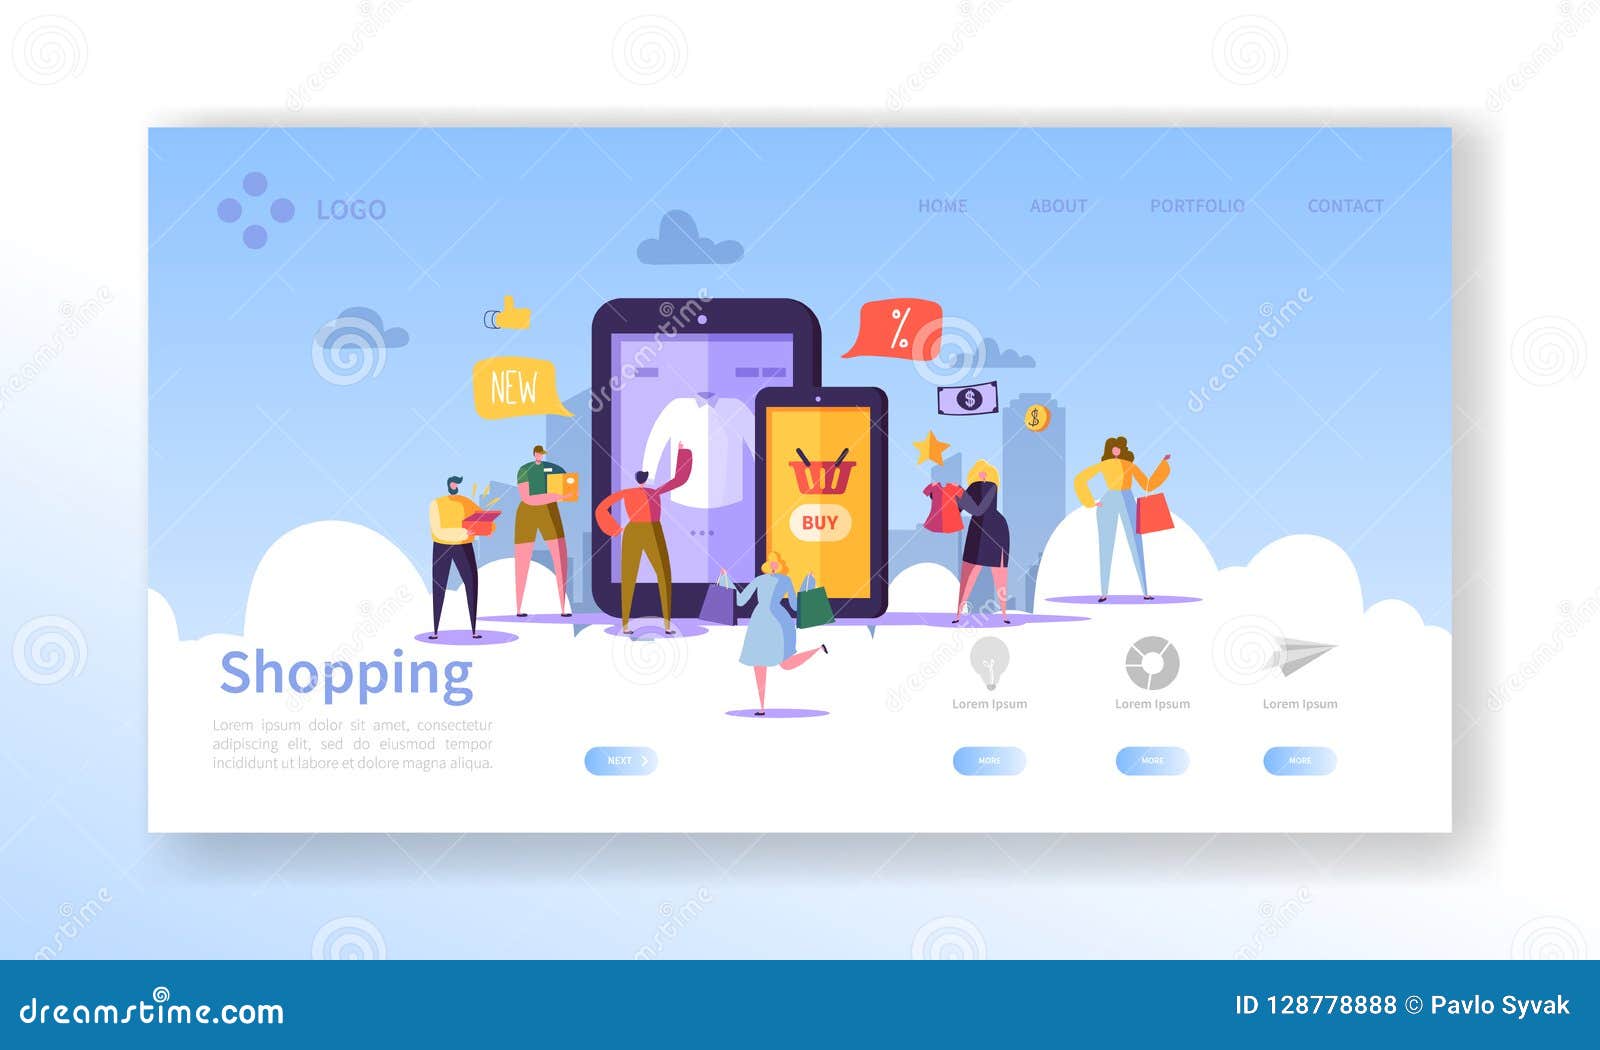 online shopping landing page. flat people characters with shopping bags website template. easy to edit and customize